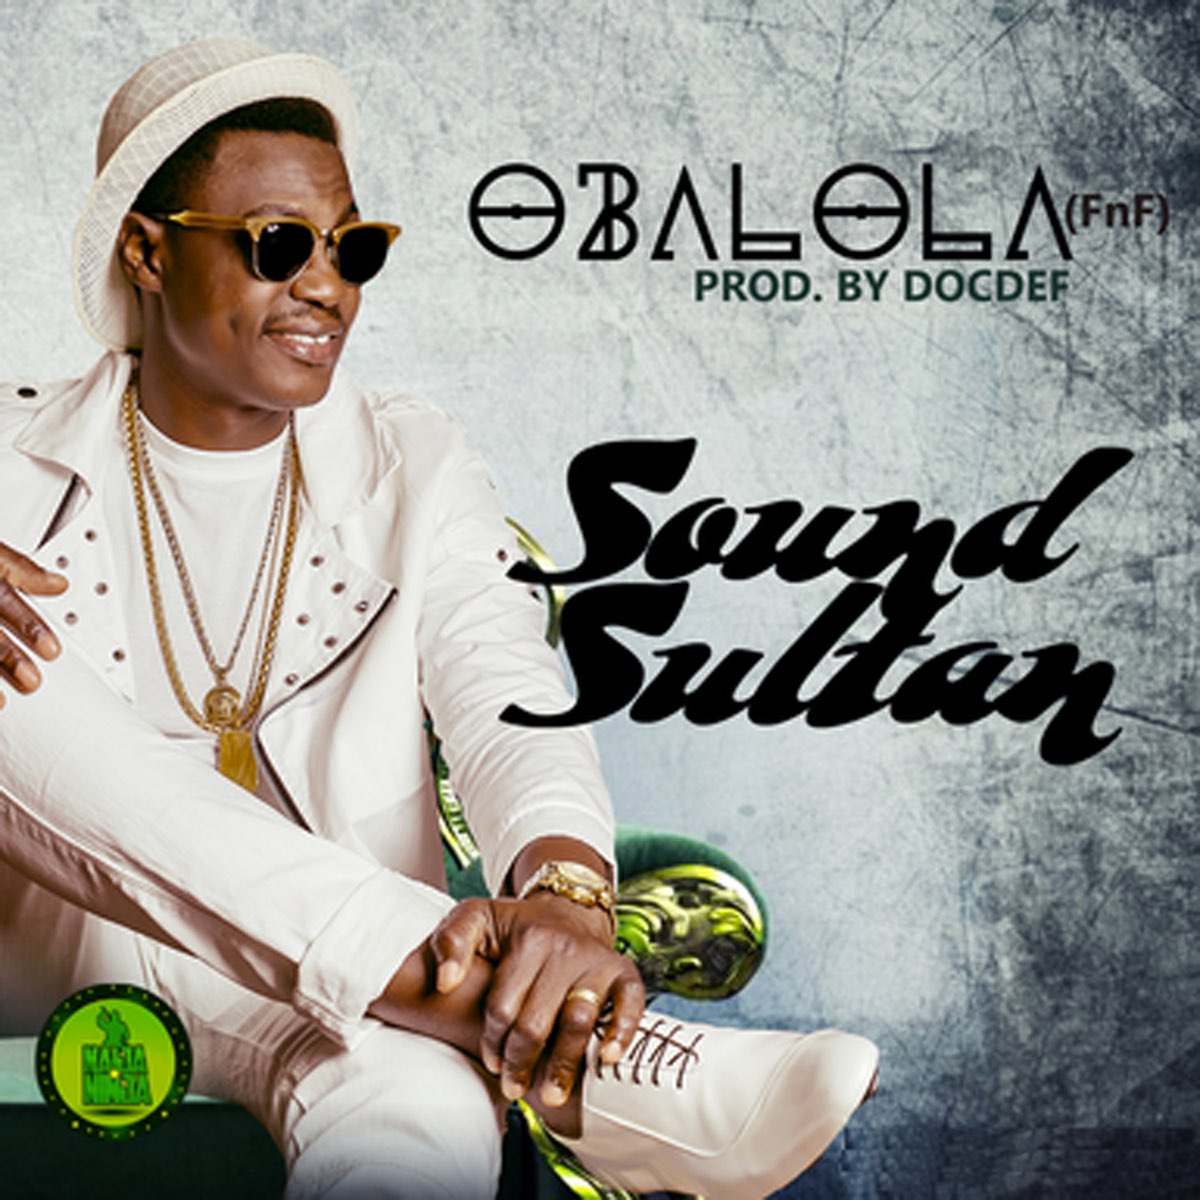 Obalola - Single by Sound Sultan on Apple Music